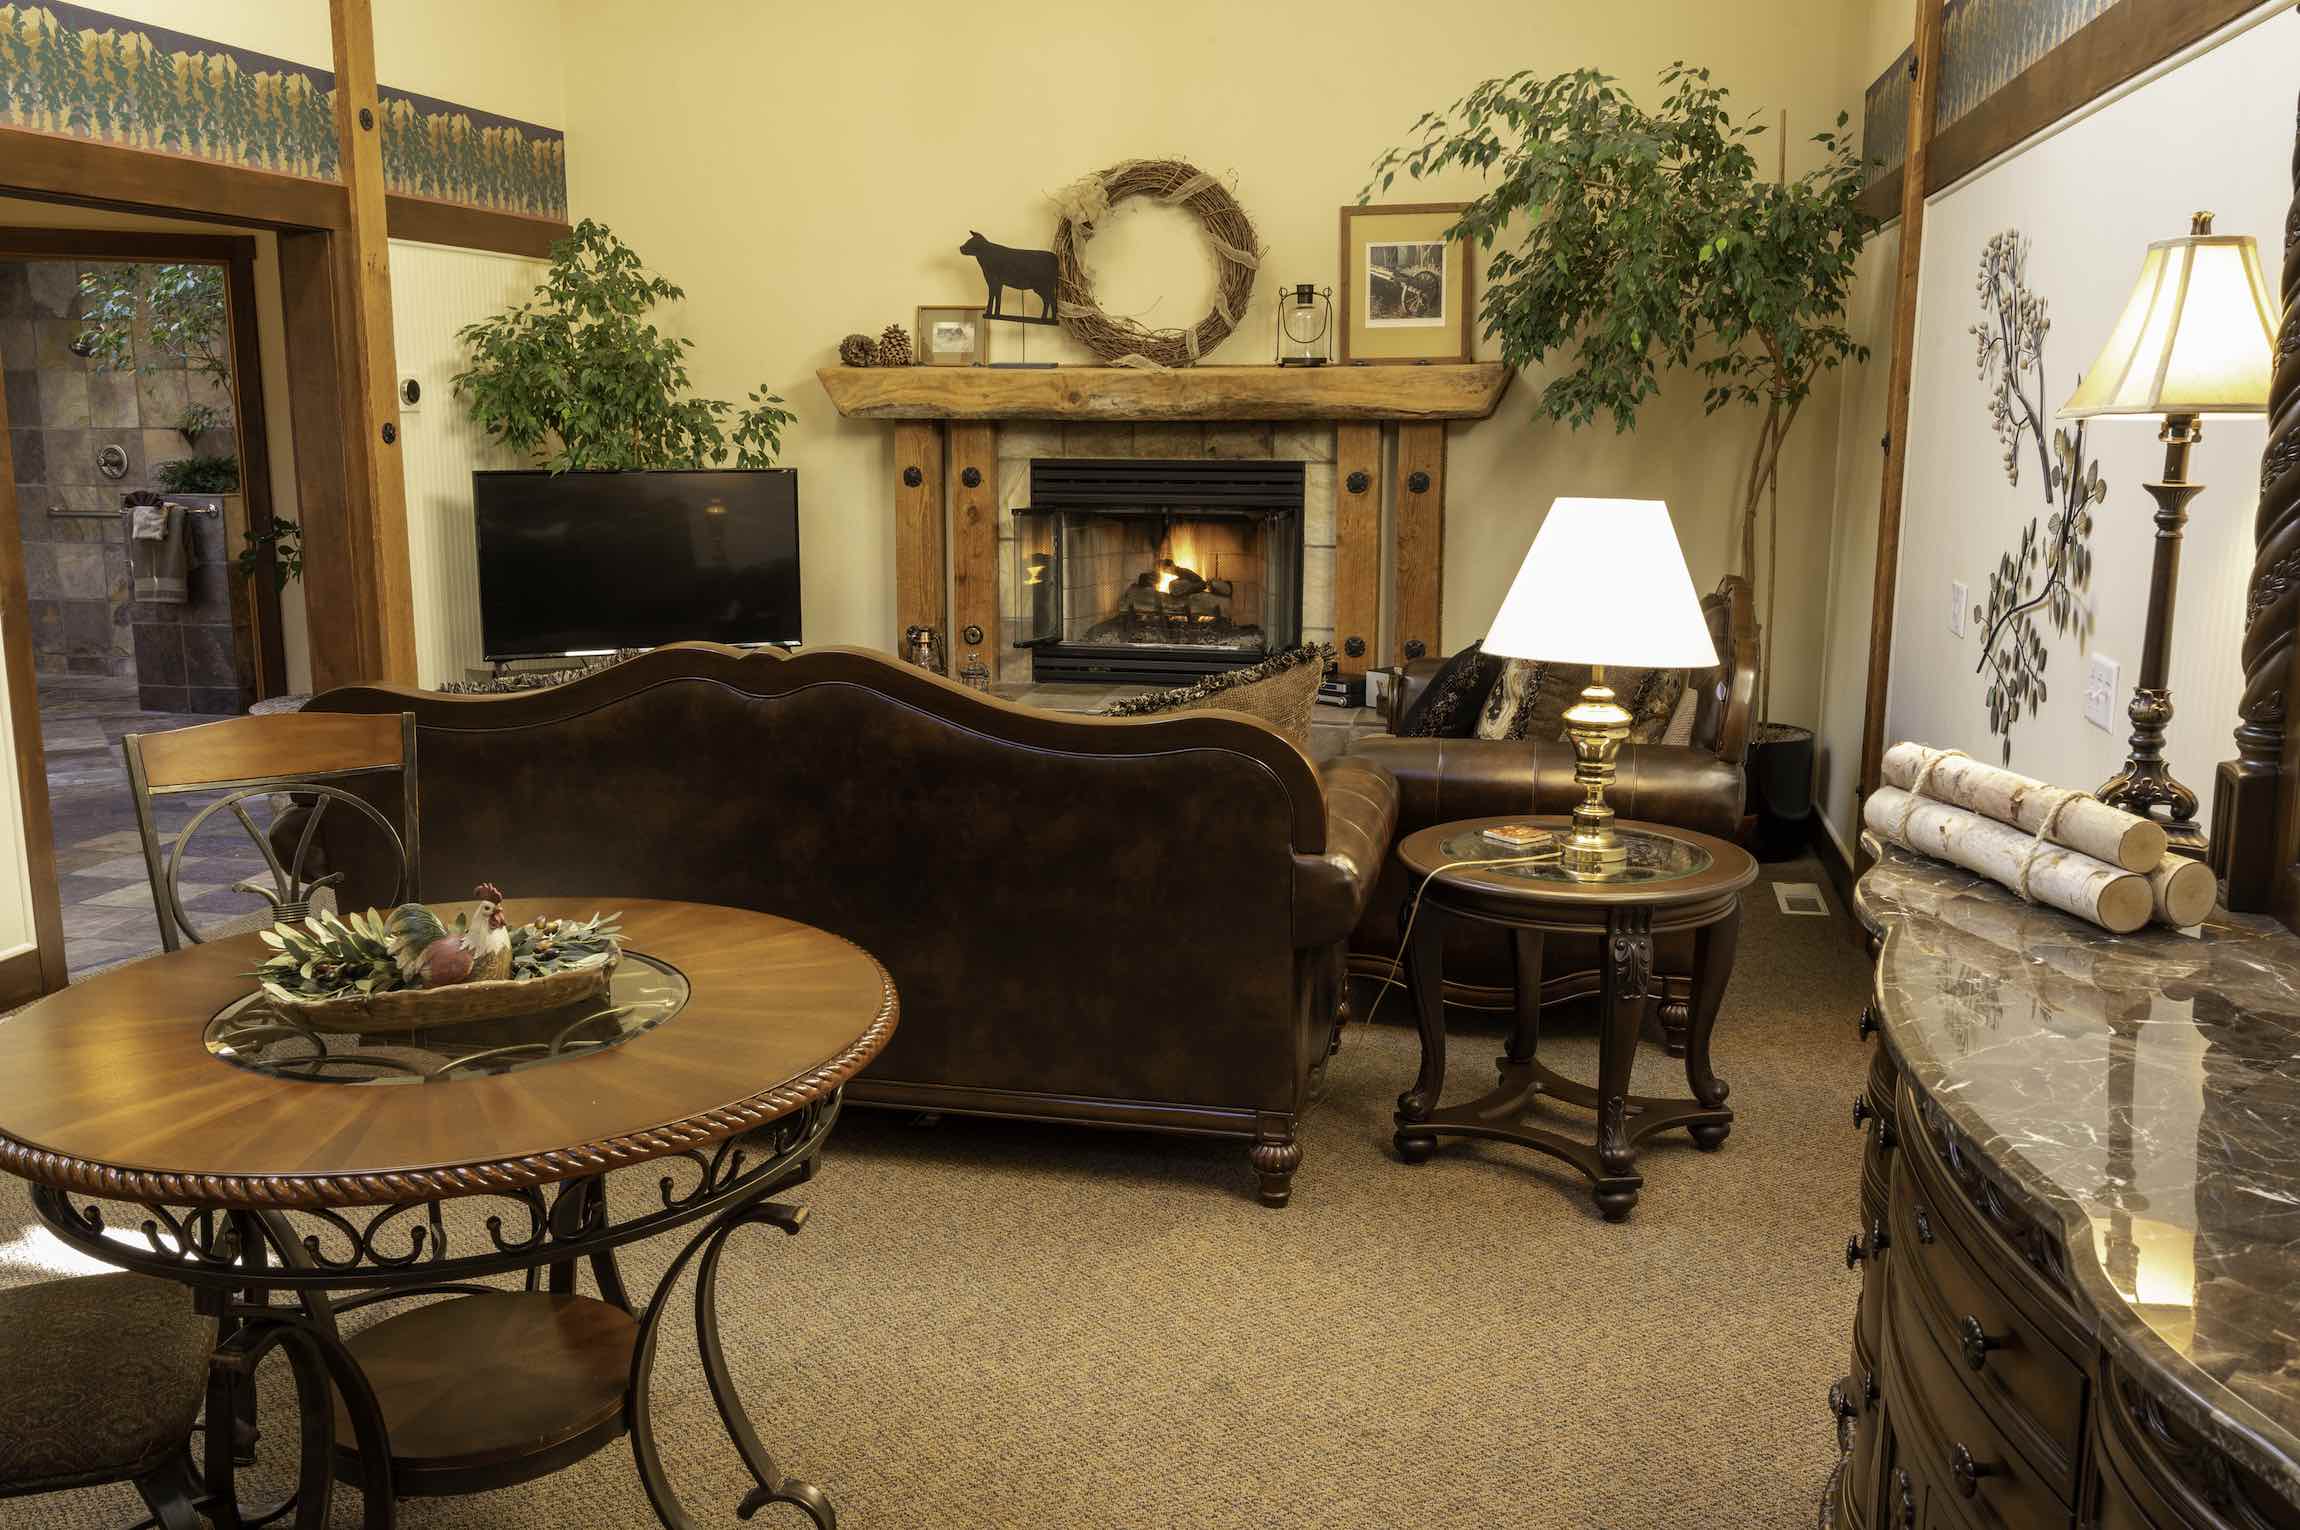  A fireplace warms the living room of the Pine Ridge Suite at Country Willows Inn & Estate in Ashland, Oregon. The Pine Ridge Suite has a jacuzzi hot tub. 